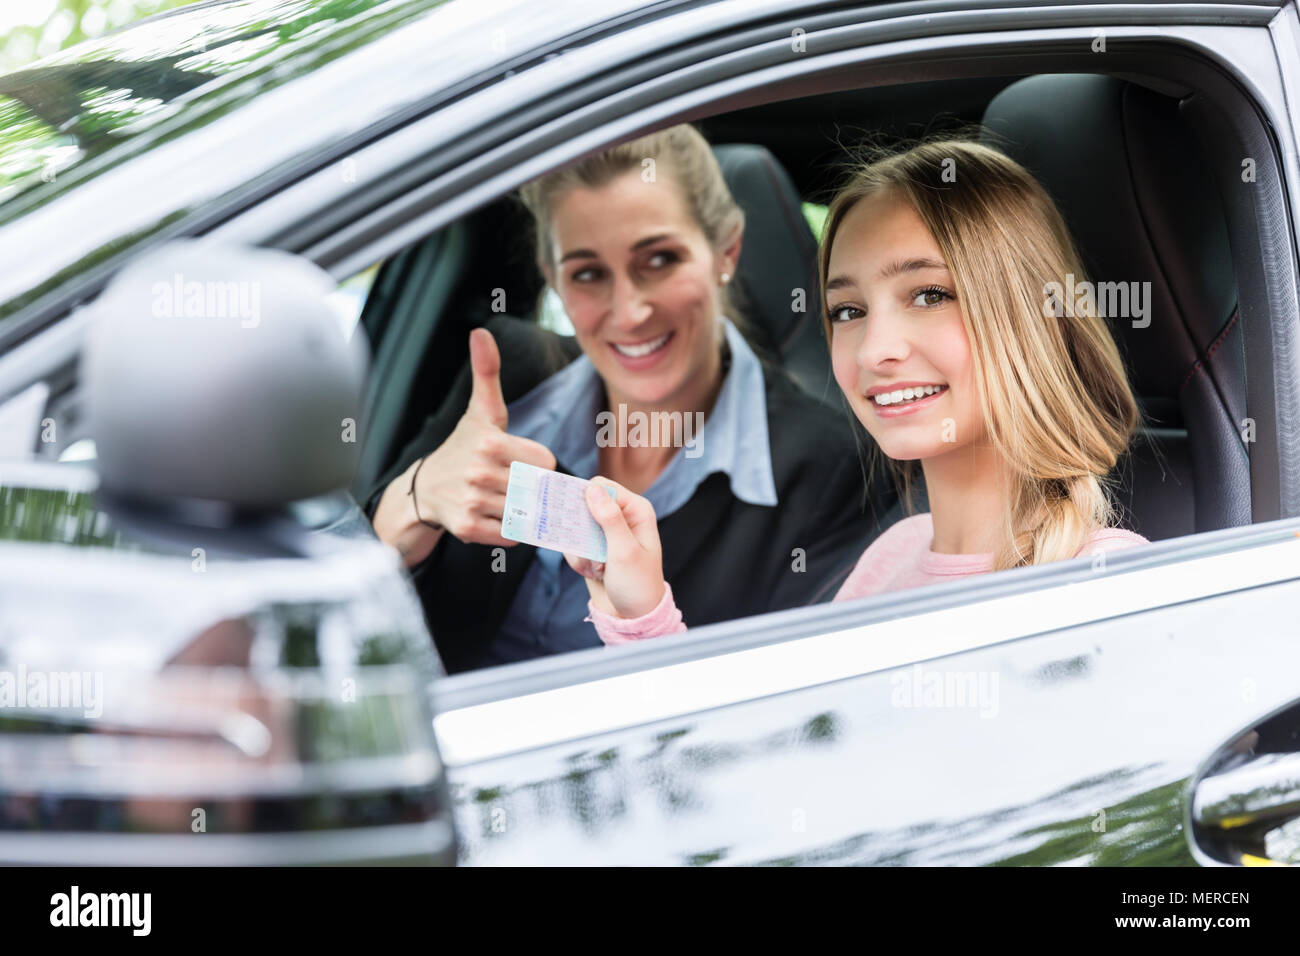 Proud driving student having passed the test Stock Photo